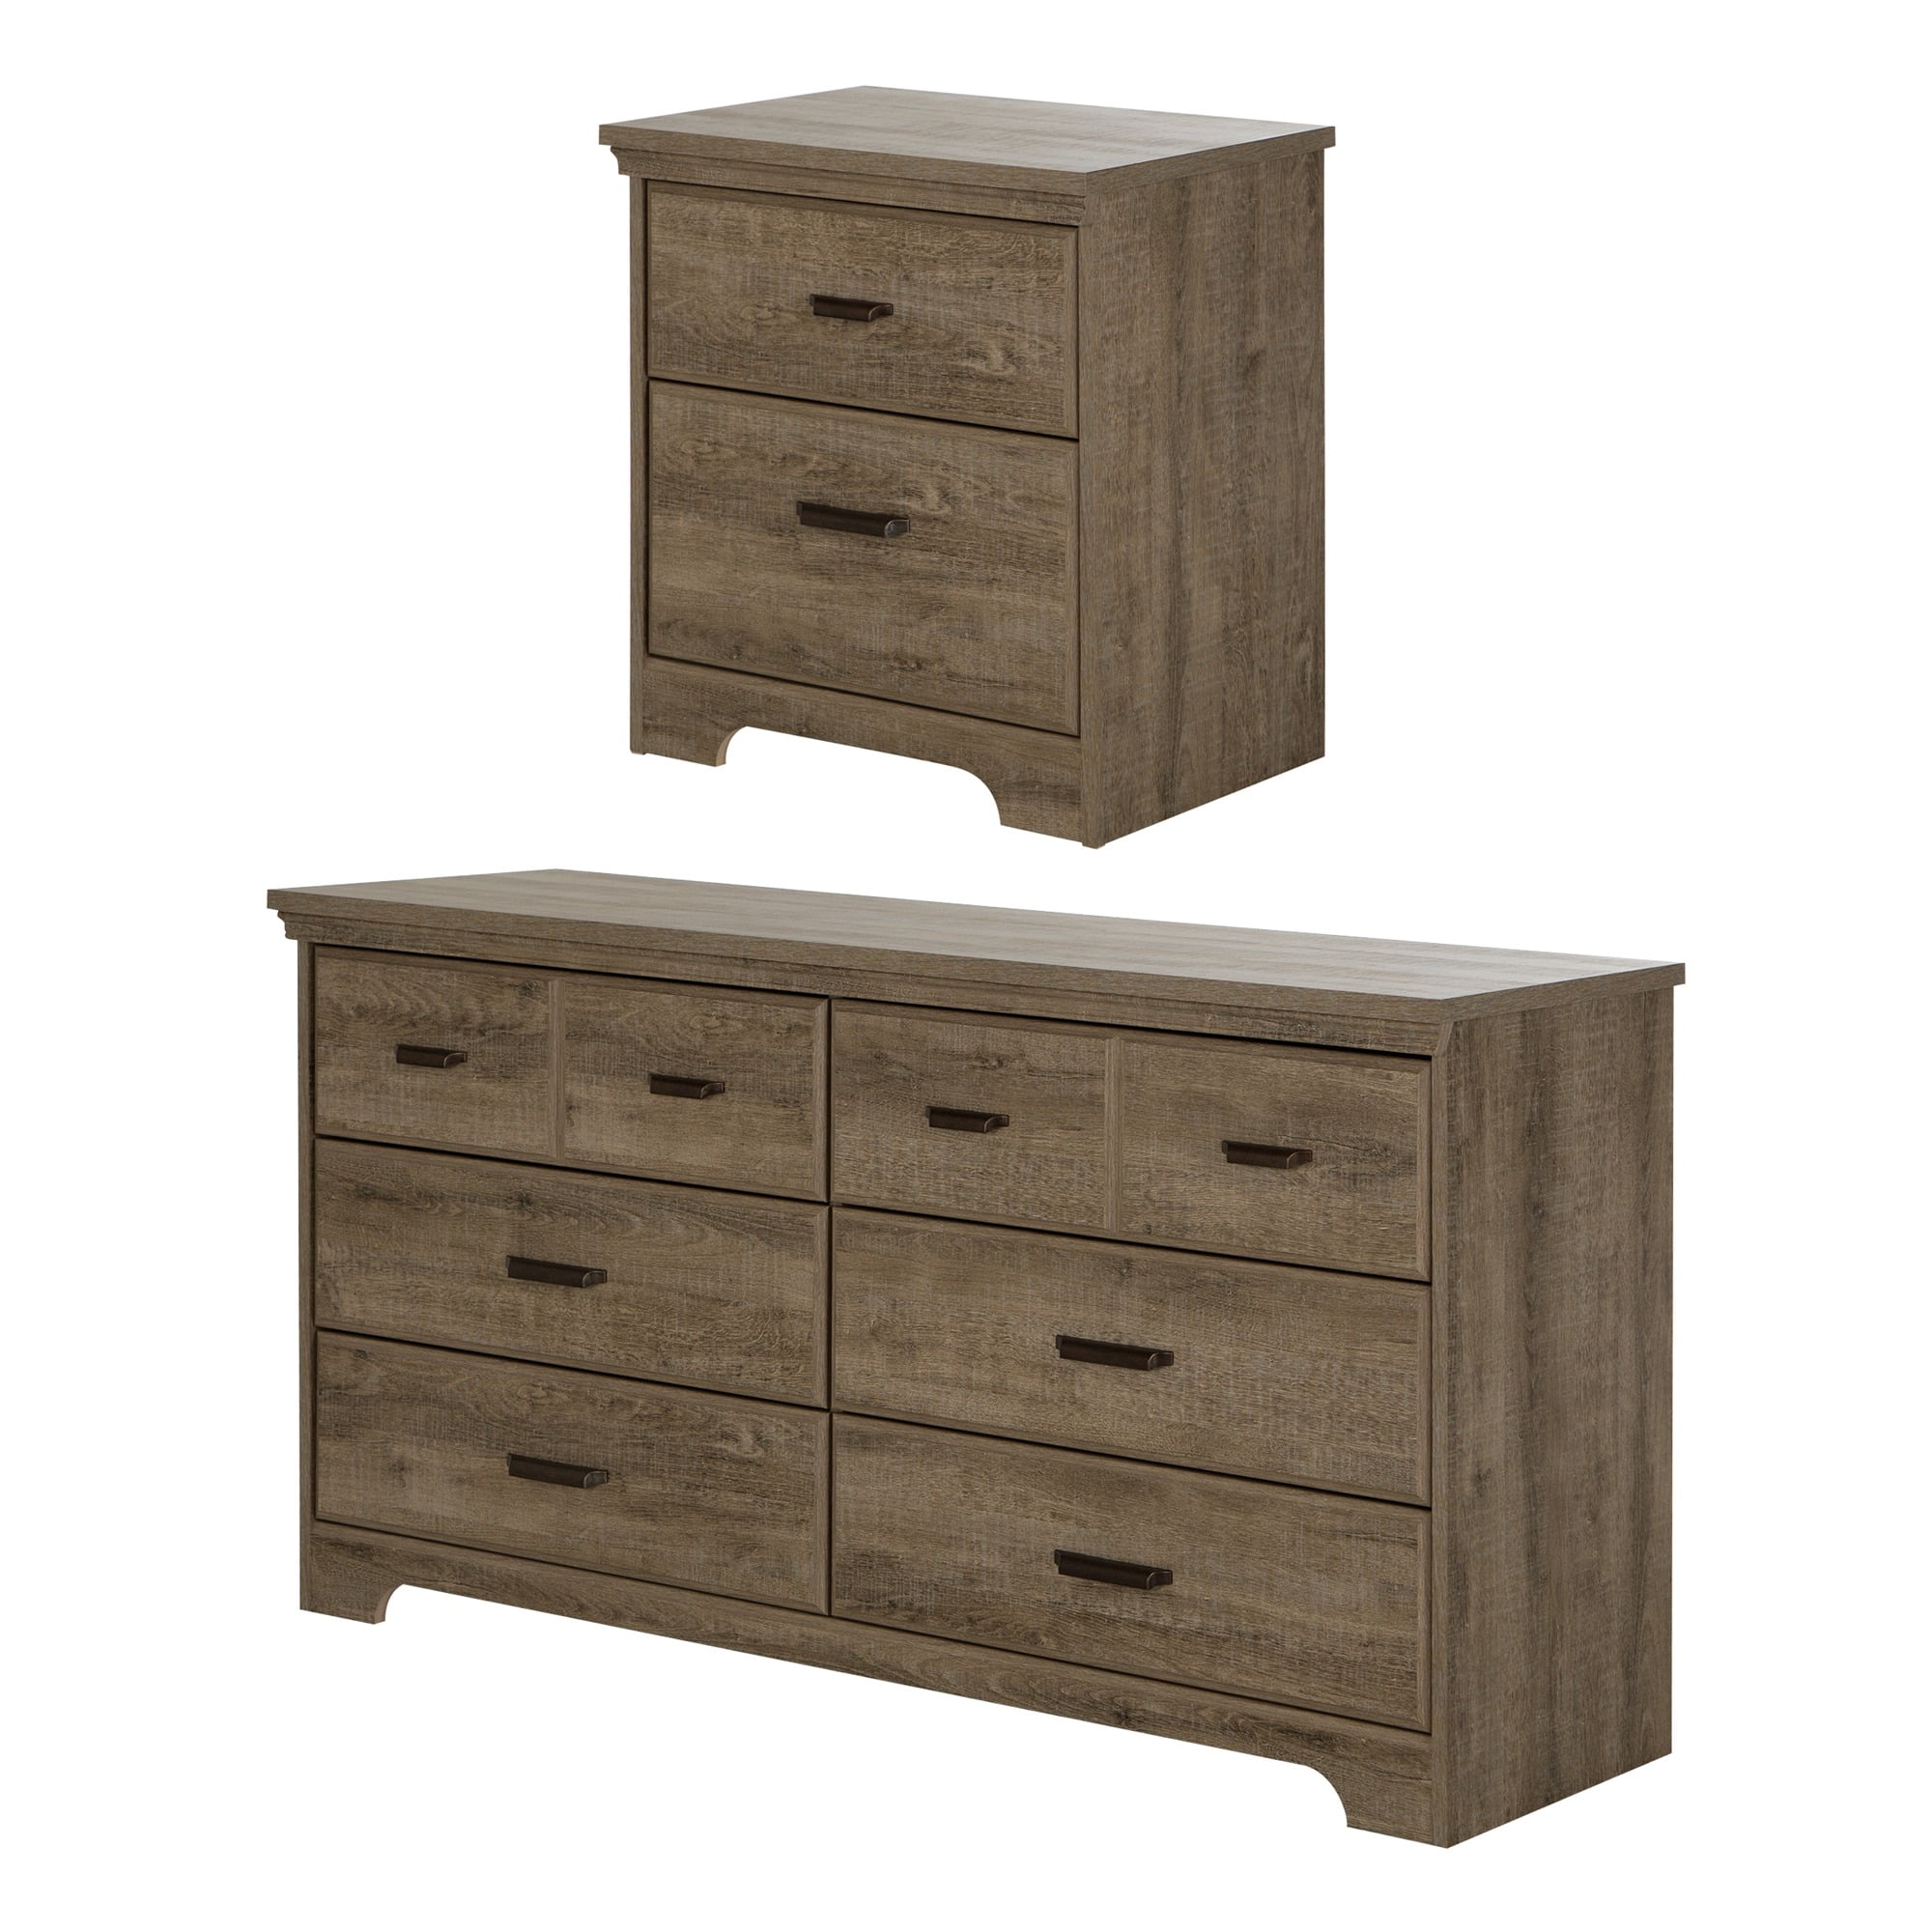 South S Versa 6 Drawer Dresser And, Dresser With Matching Nightstand